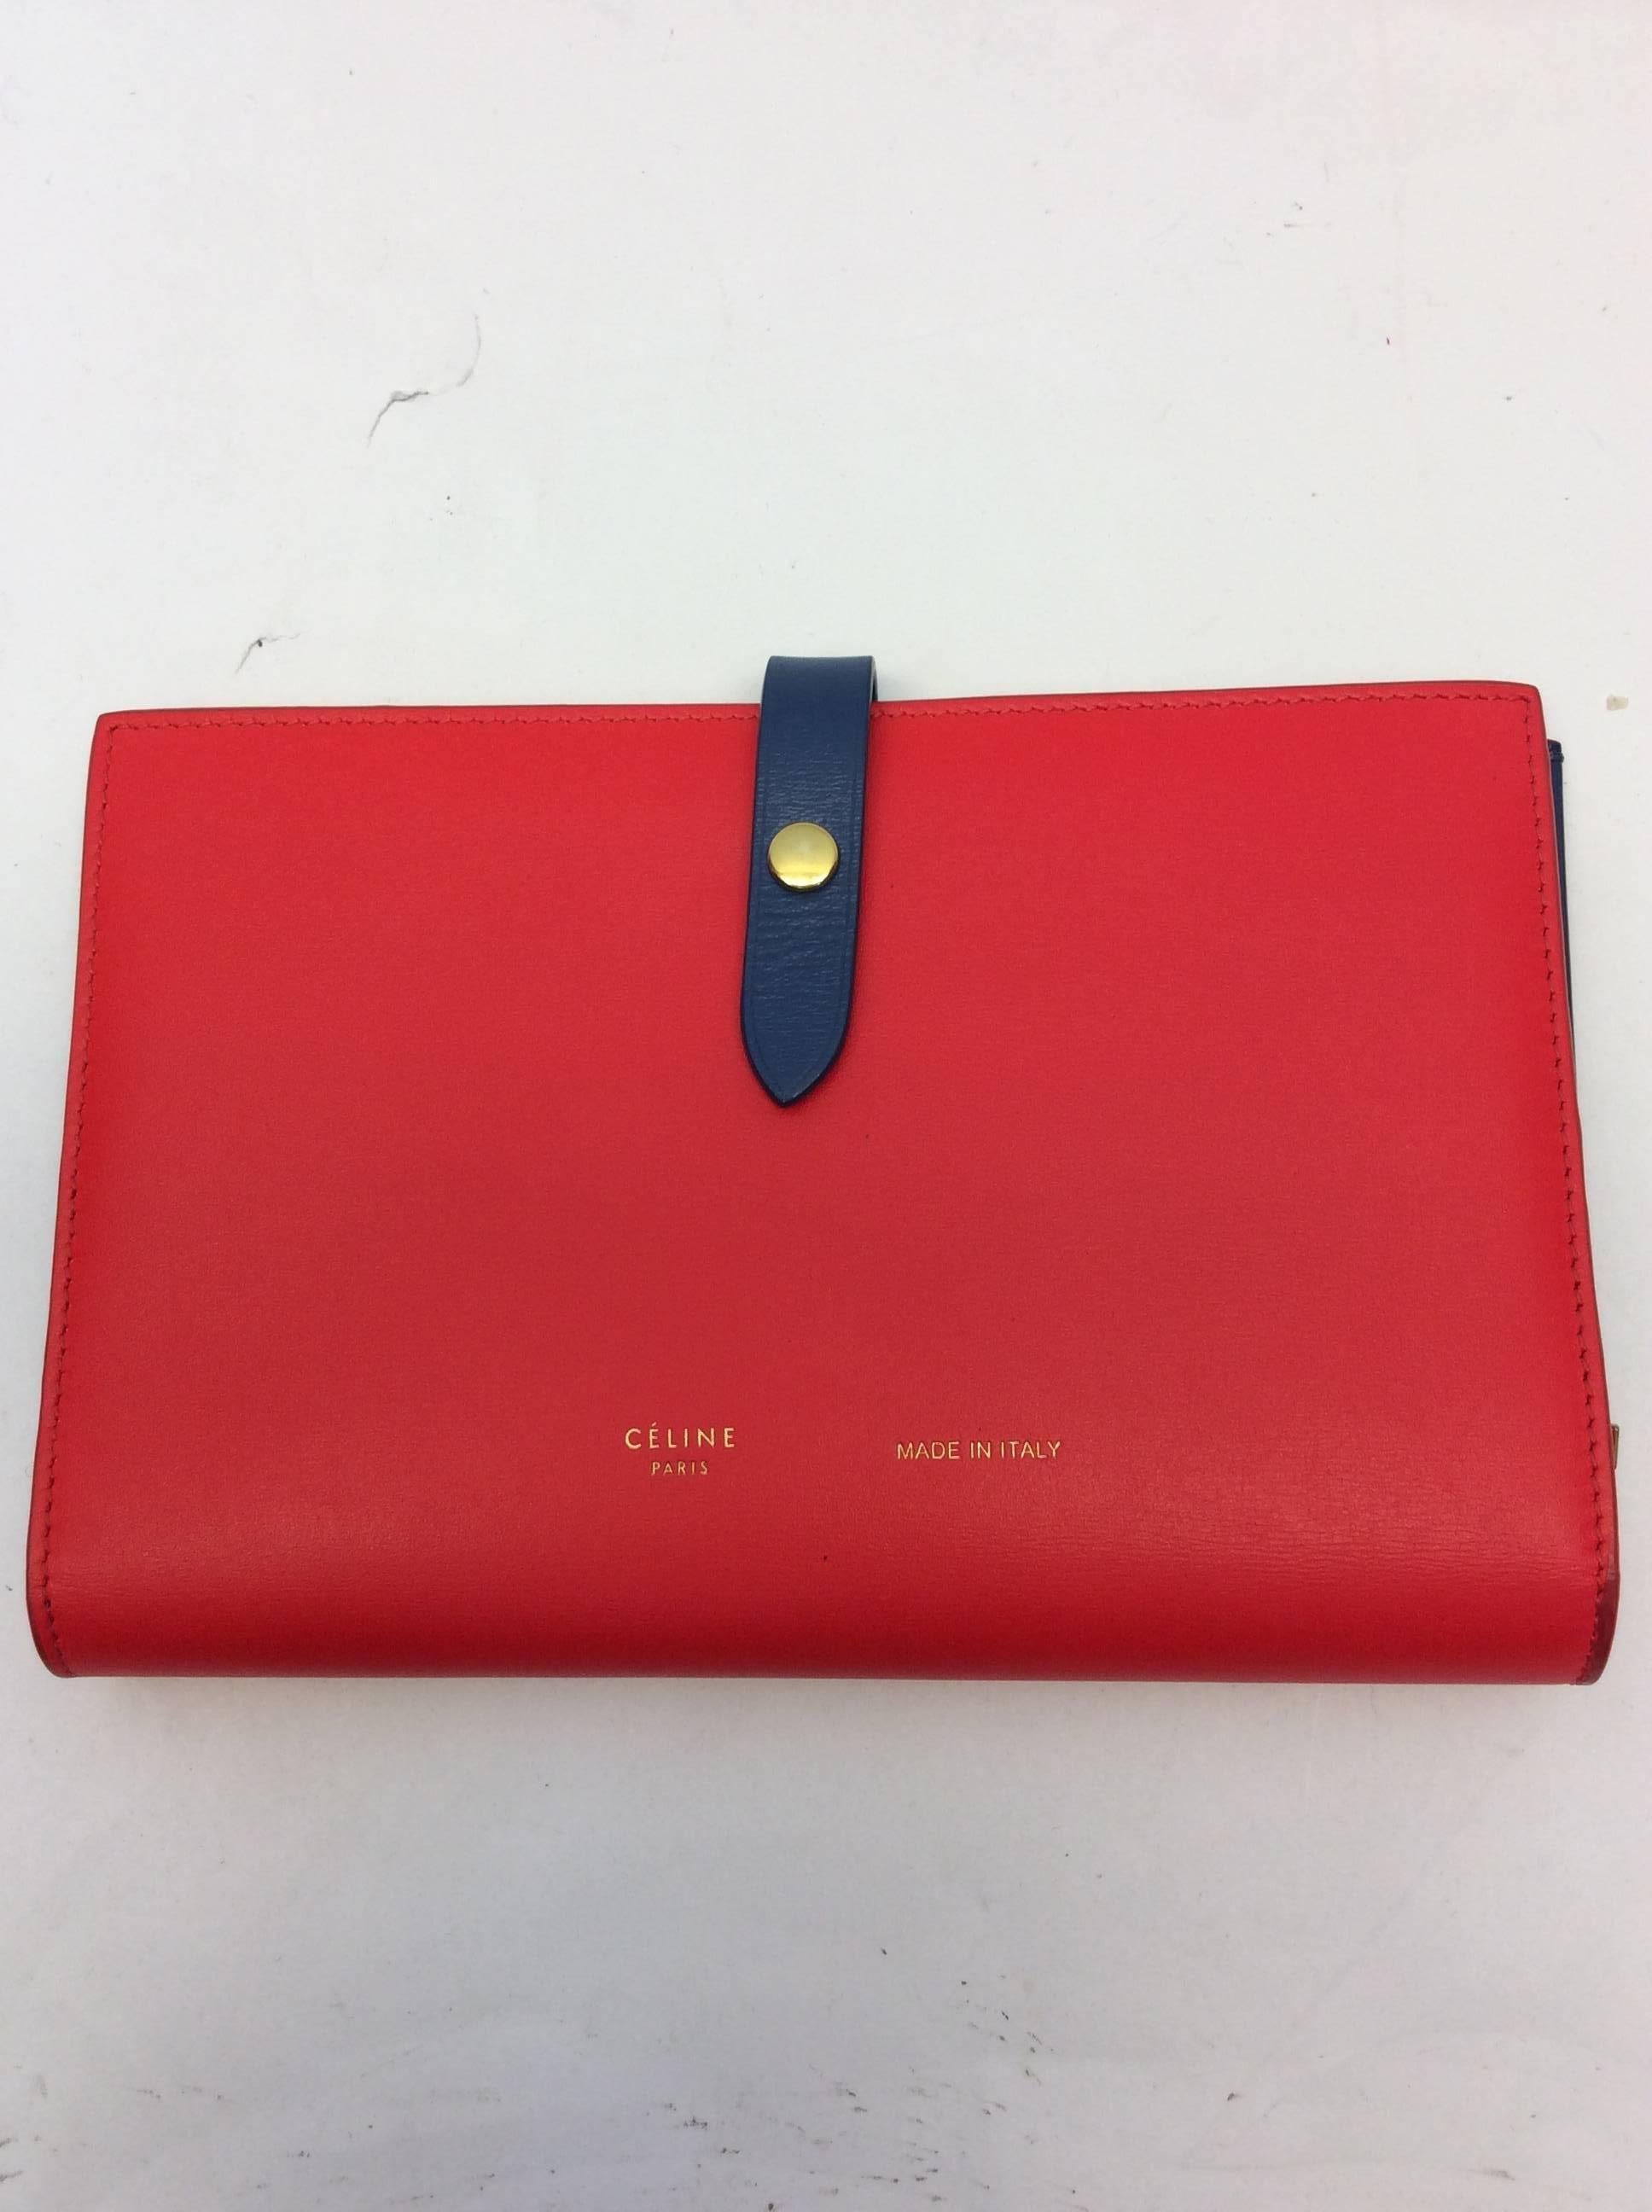 Red Snap Shut Wallet
7.5 inches wide, 5 inches tall
Includes one zipped pocket, and two large open pockets
10 card slots available
Features snap closure
Leather exterior with suede lining